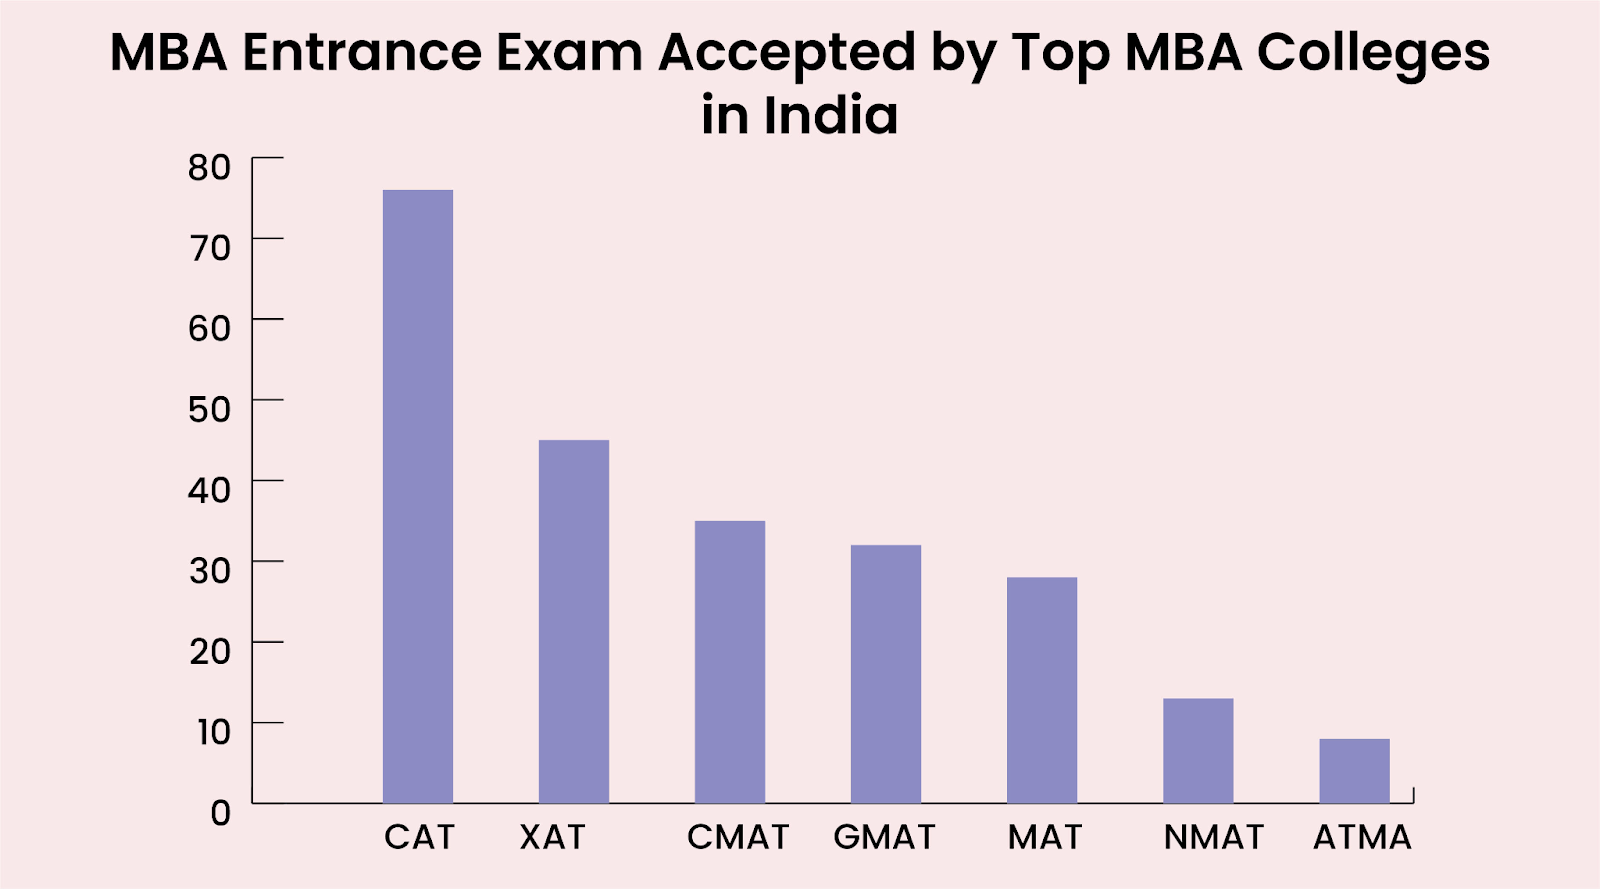 Top 5 benefits of MBA after Engineering